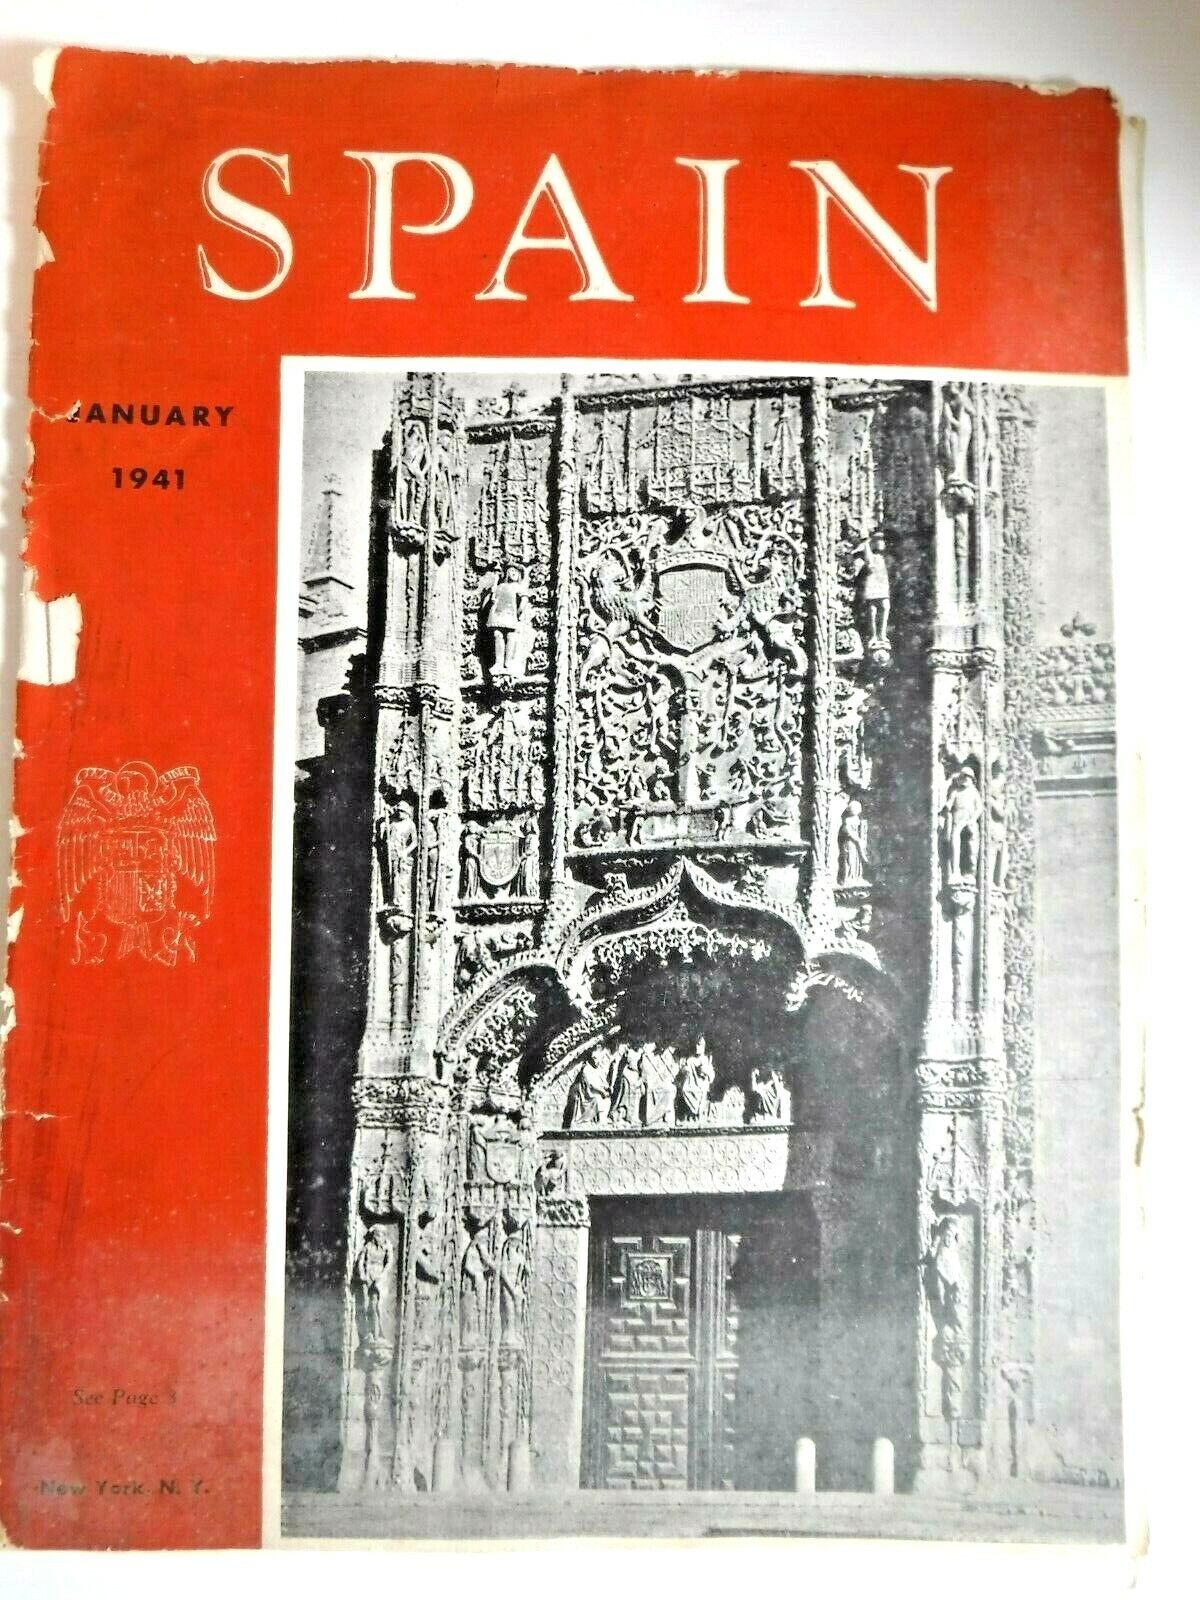 SPAIN Magazine January 1941 Monthly Publication Spanish Current Events ENGLISH